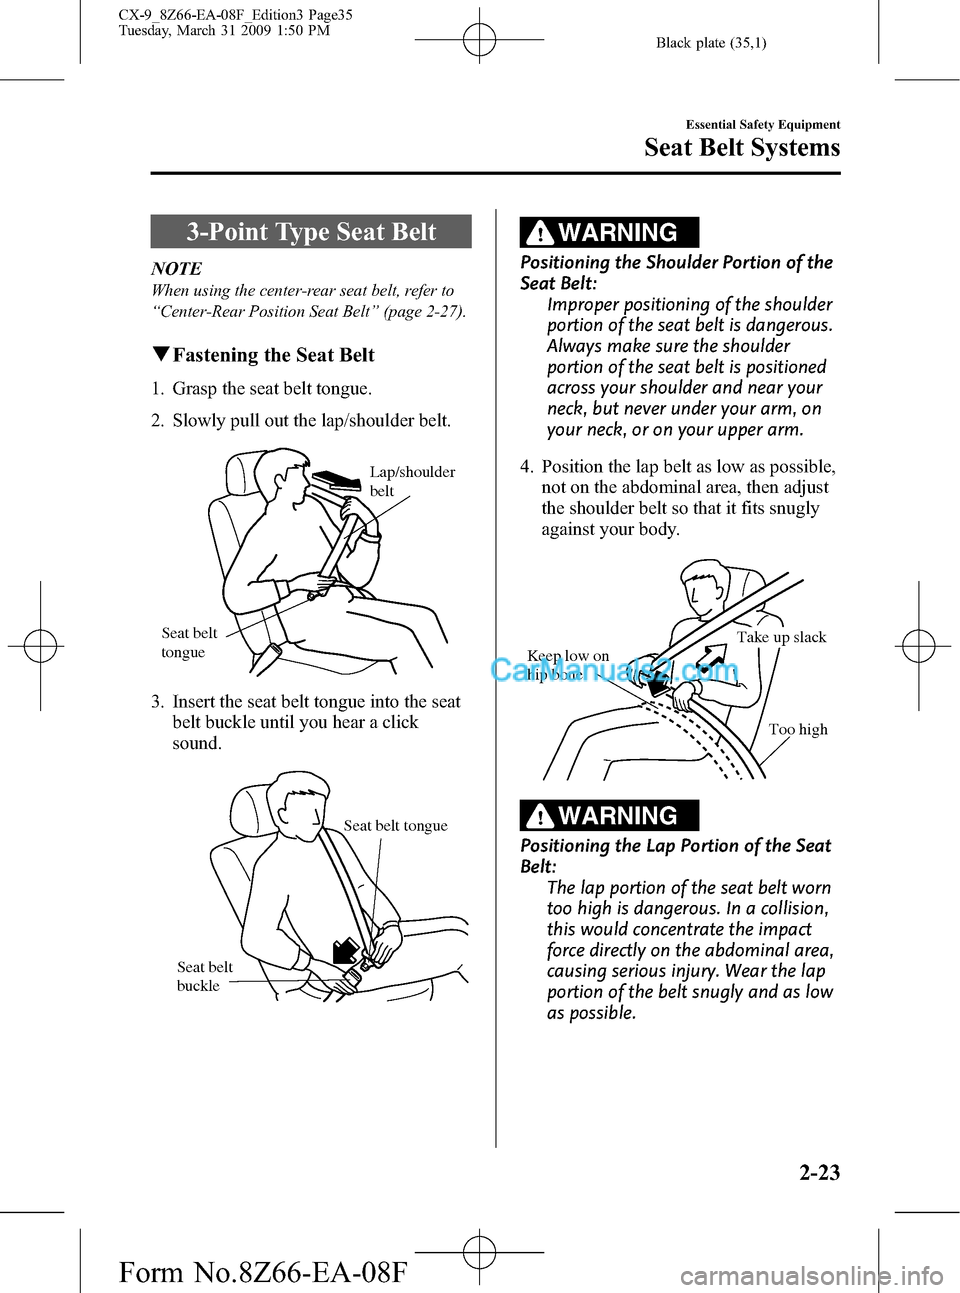 MAZDA MODEL CX-9 2009   (in English) Owners Guide Black plate (35,1)
3-Point Type Seat Belt
NOTE
When using the center-rear seat belt, refer to
“Center-Rear Position Seat Belt”(page 2-27).
qFastening the Seat Belt
1. Grasp the seat belt tongue.
2